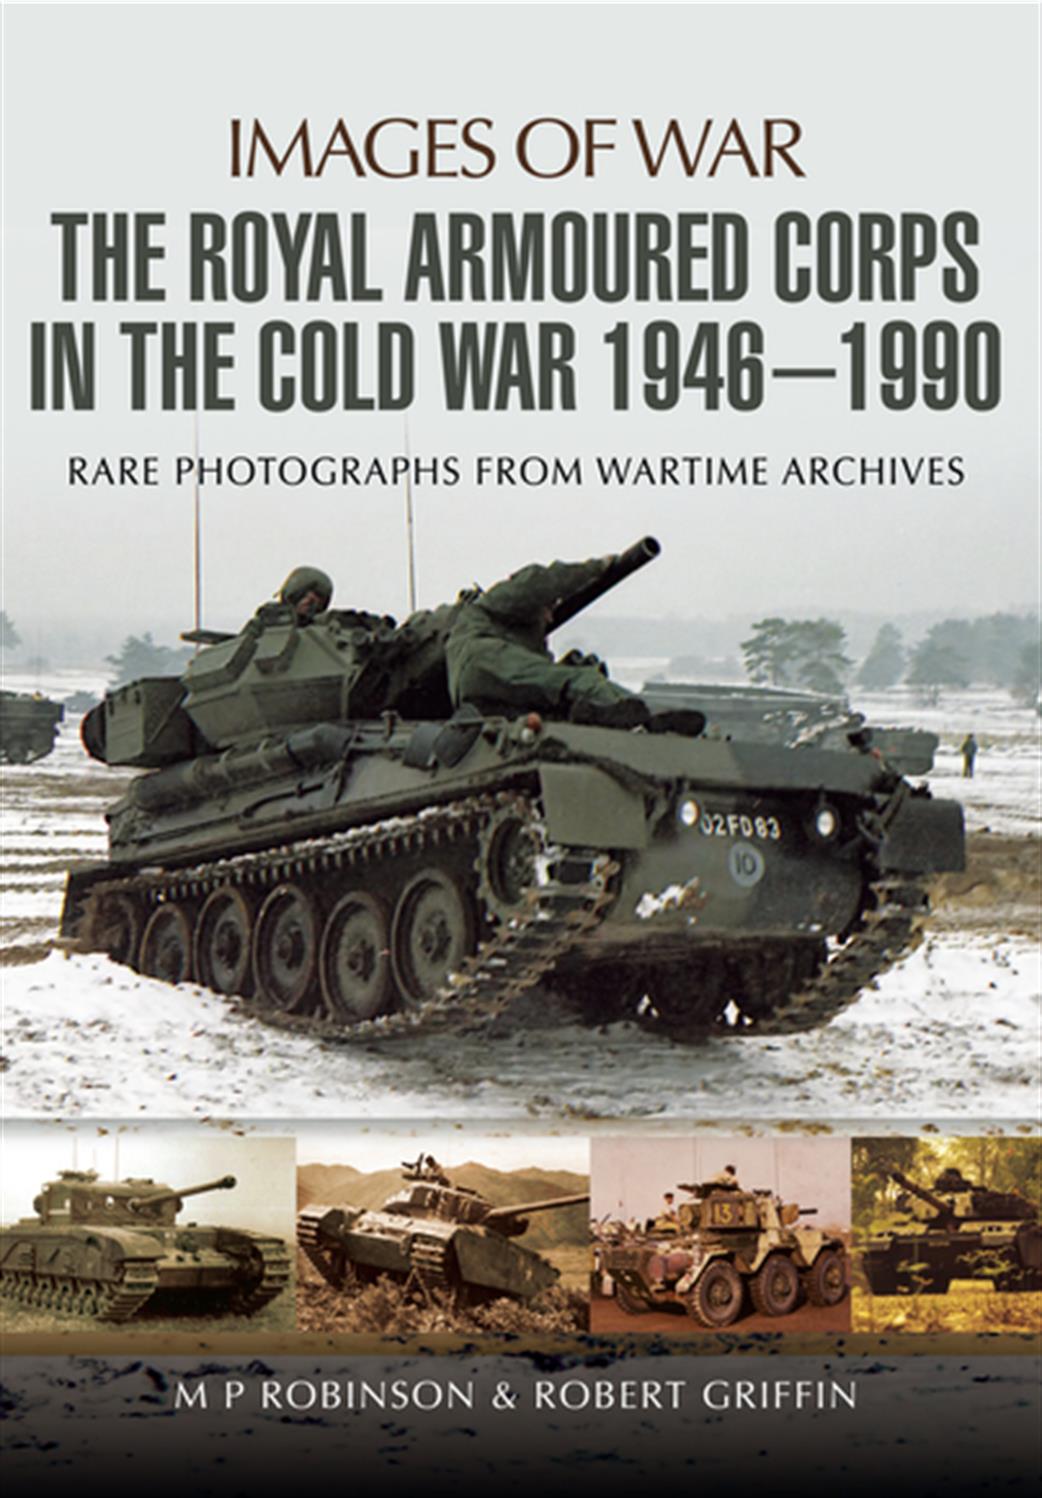 Pen & Sword  9781473843752 Images of War Royal Armoured Corps in the Cold War 1944-1990 by M.Robinson & Rob Griffin